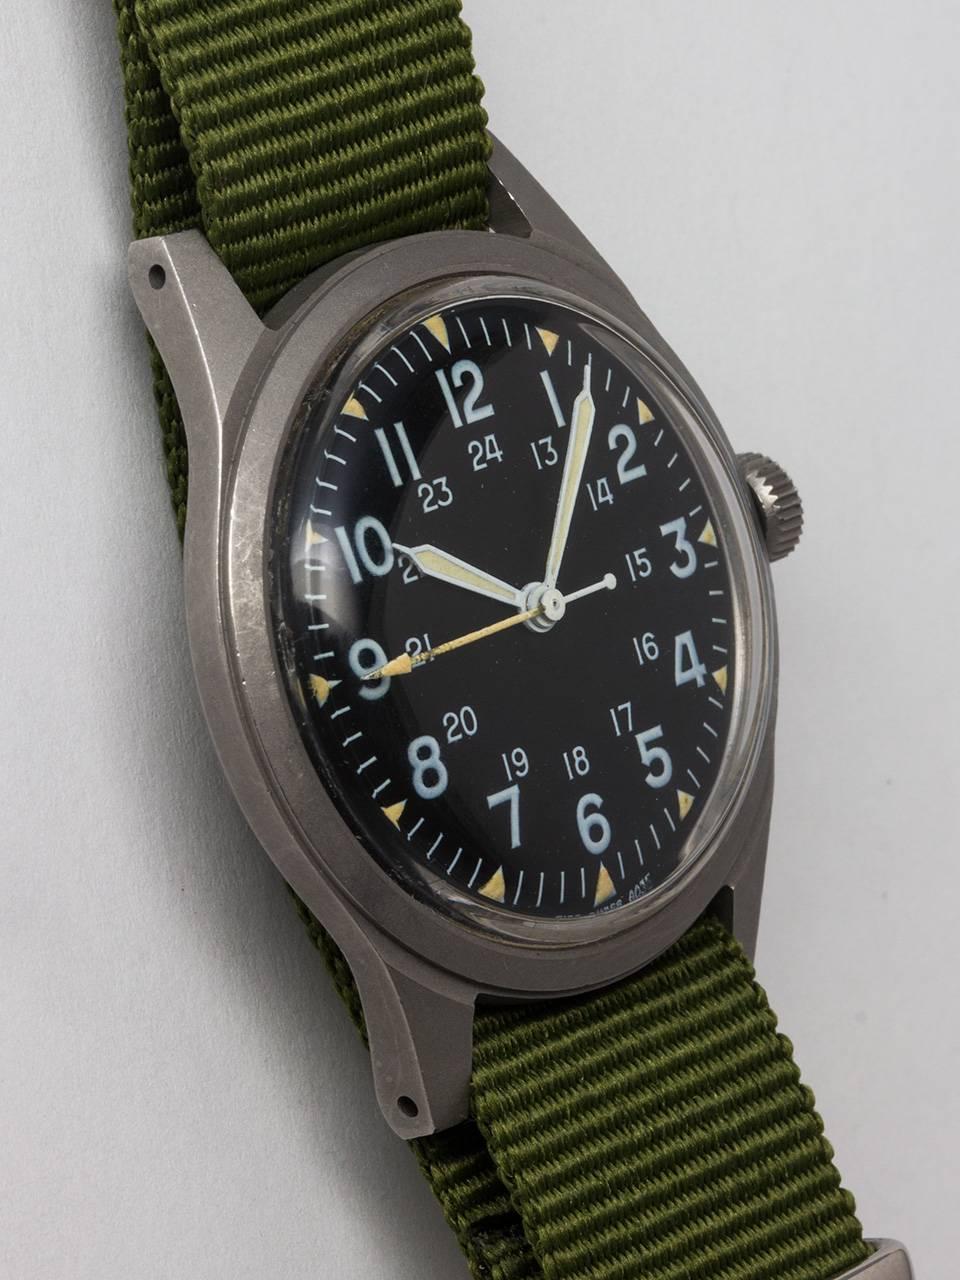 Hamilton US Military Issue Vietnam Era Wristwatch c. 1971. Featuring 34 x 41mm non reflective brushed finish base metal case and acrylic crystal. Original matte black dial with 24 hour indexes and triangular luminous hour indexes, luminous hands and